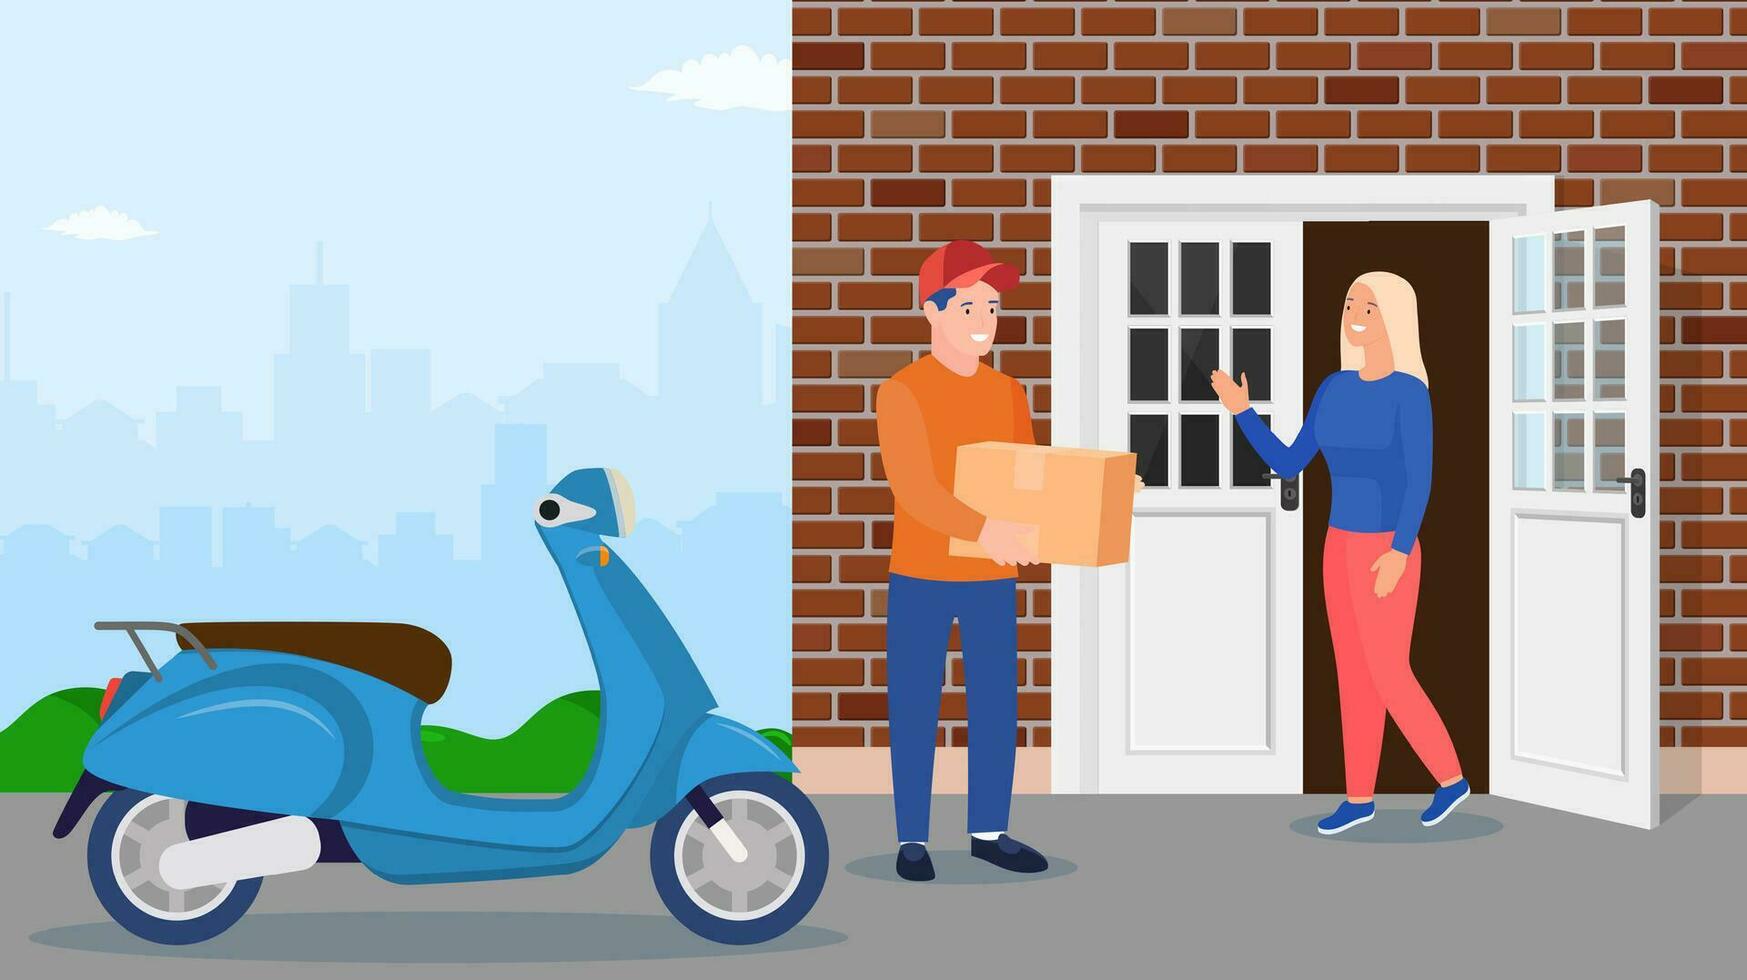 Man left cardboard boxes with goods near house facade. Courier character holds parcel. Carton delivery packaging closed box. Free and fast shipping. Vector illustration in flat style